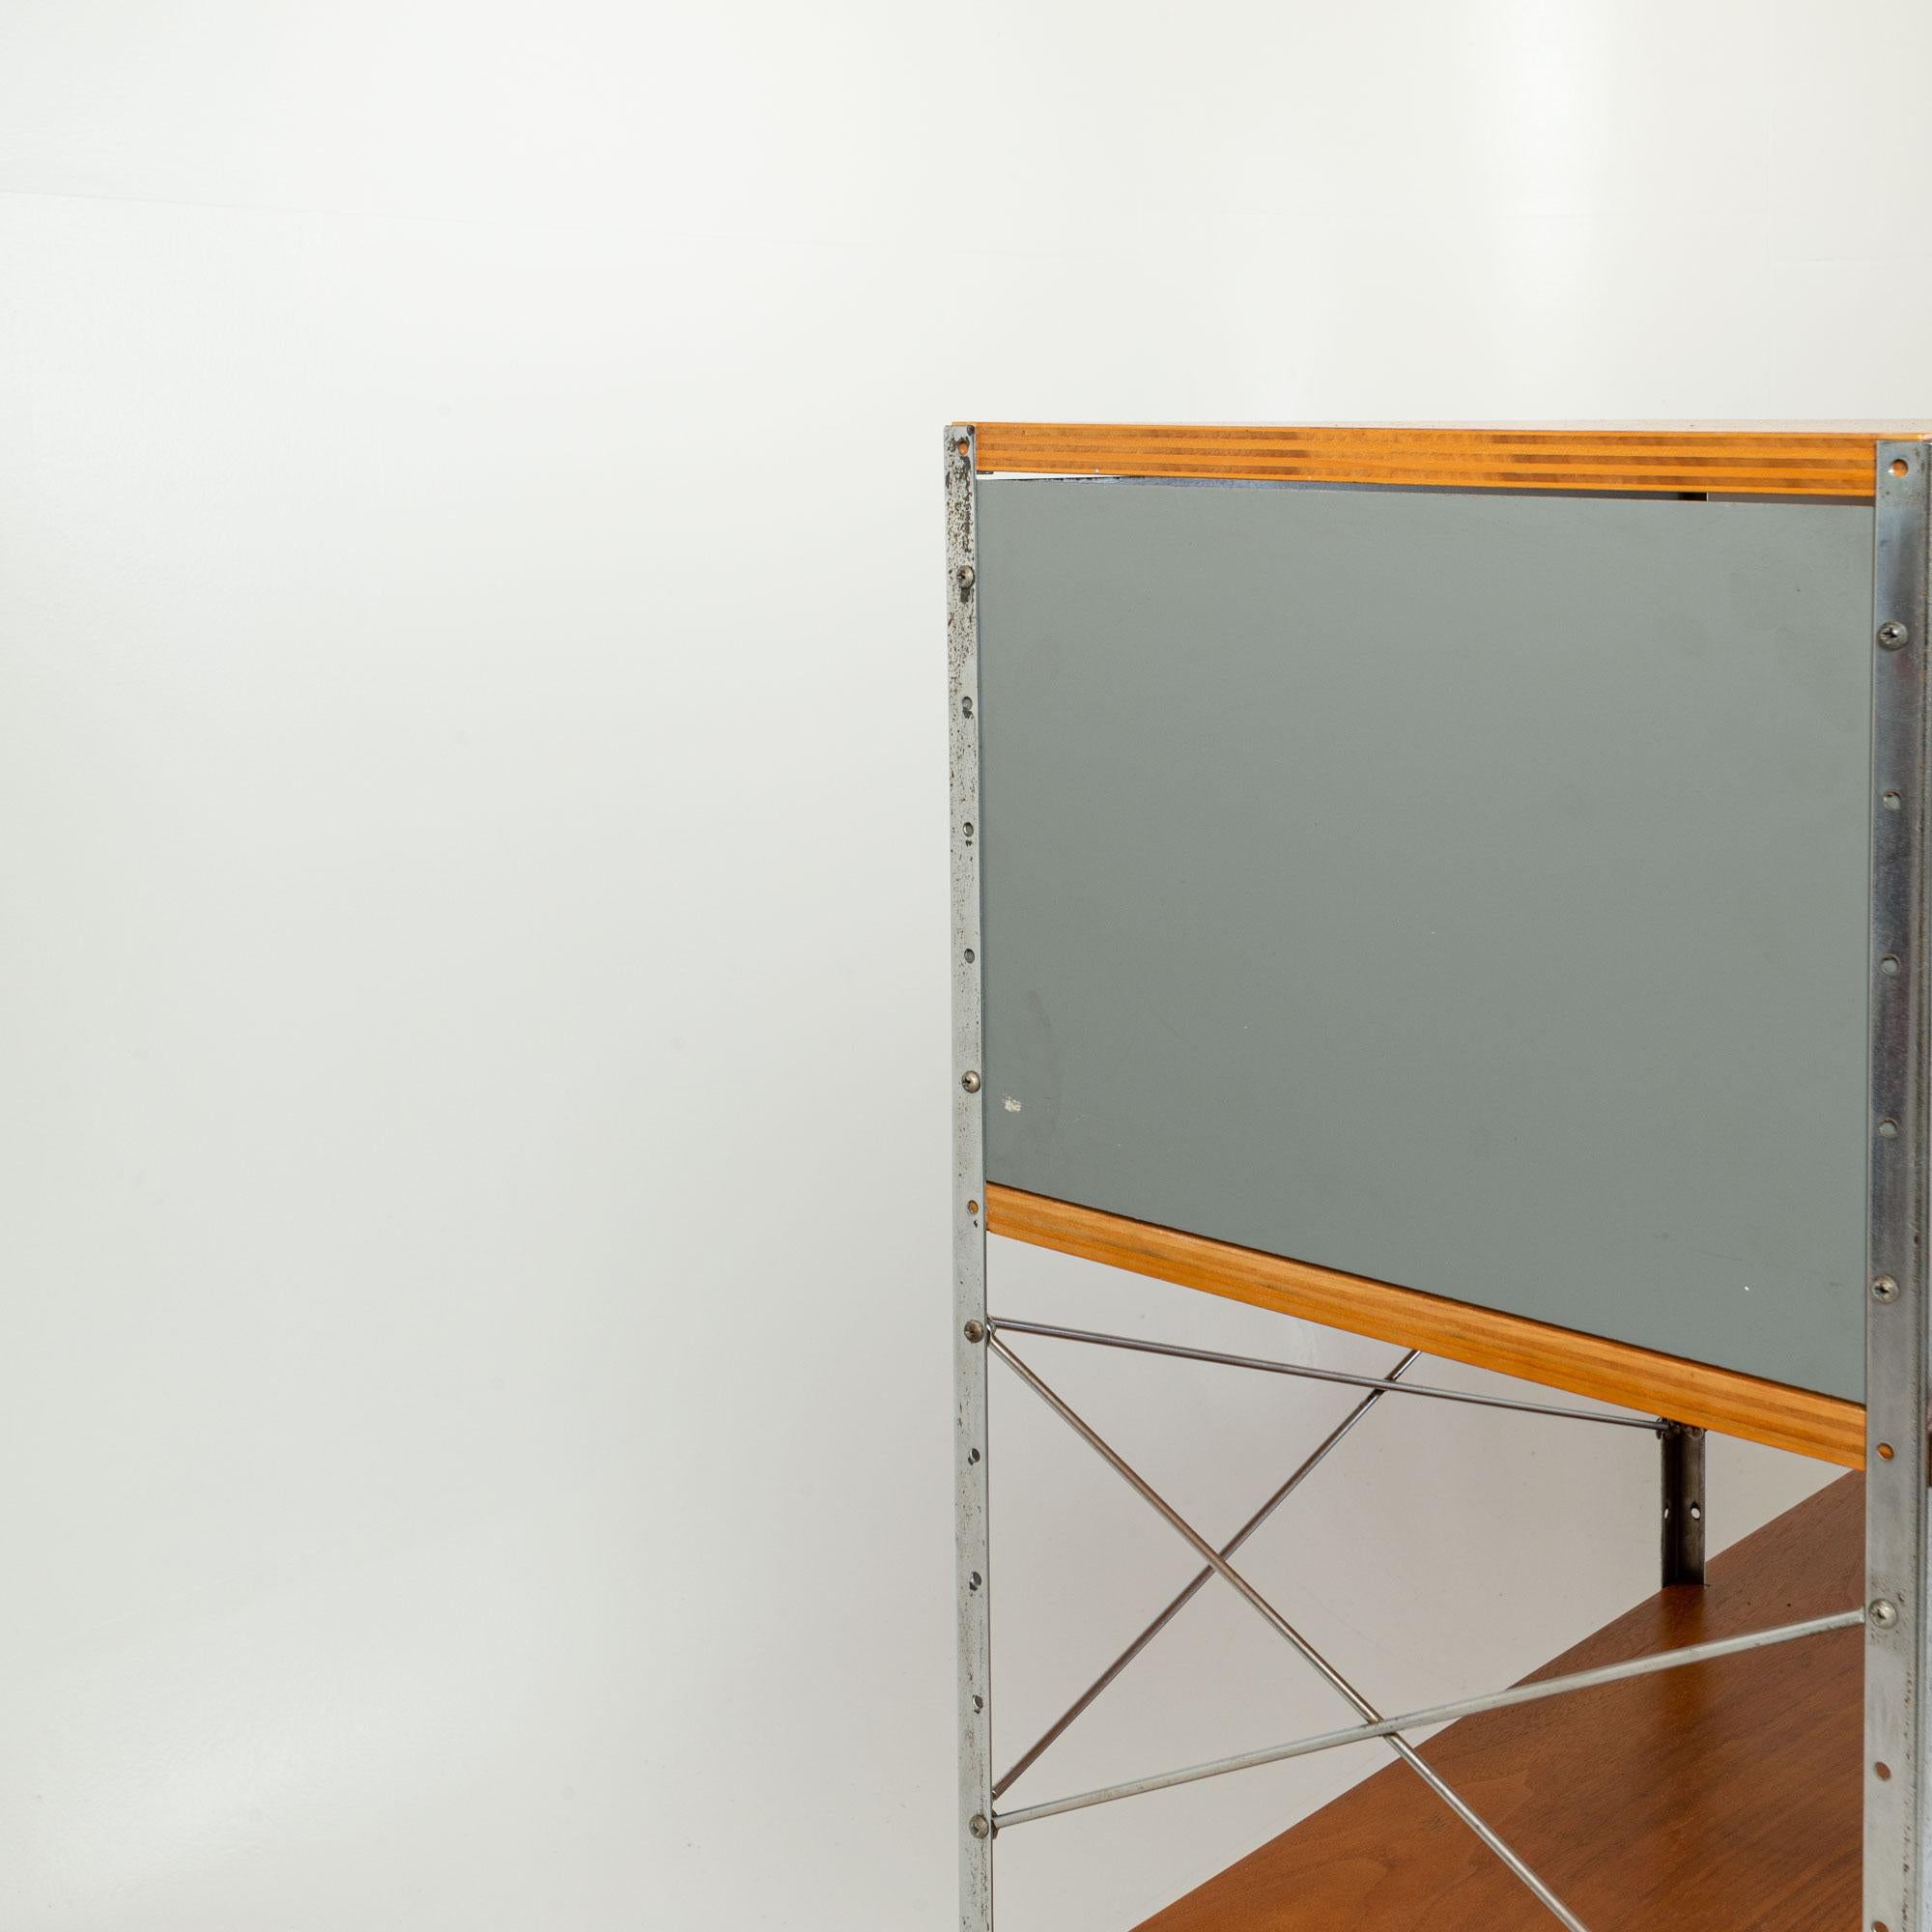 Second Generation Eames Storage Unit ESU 400-N series by Charles and Ray Eames 3